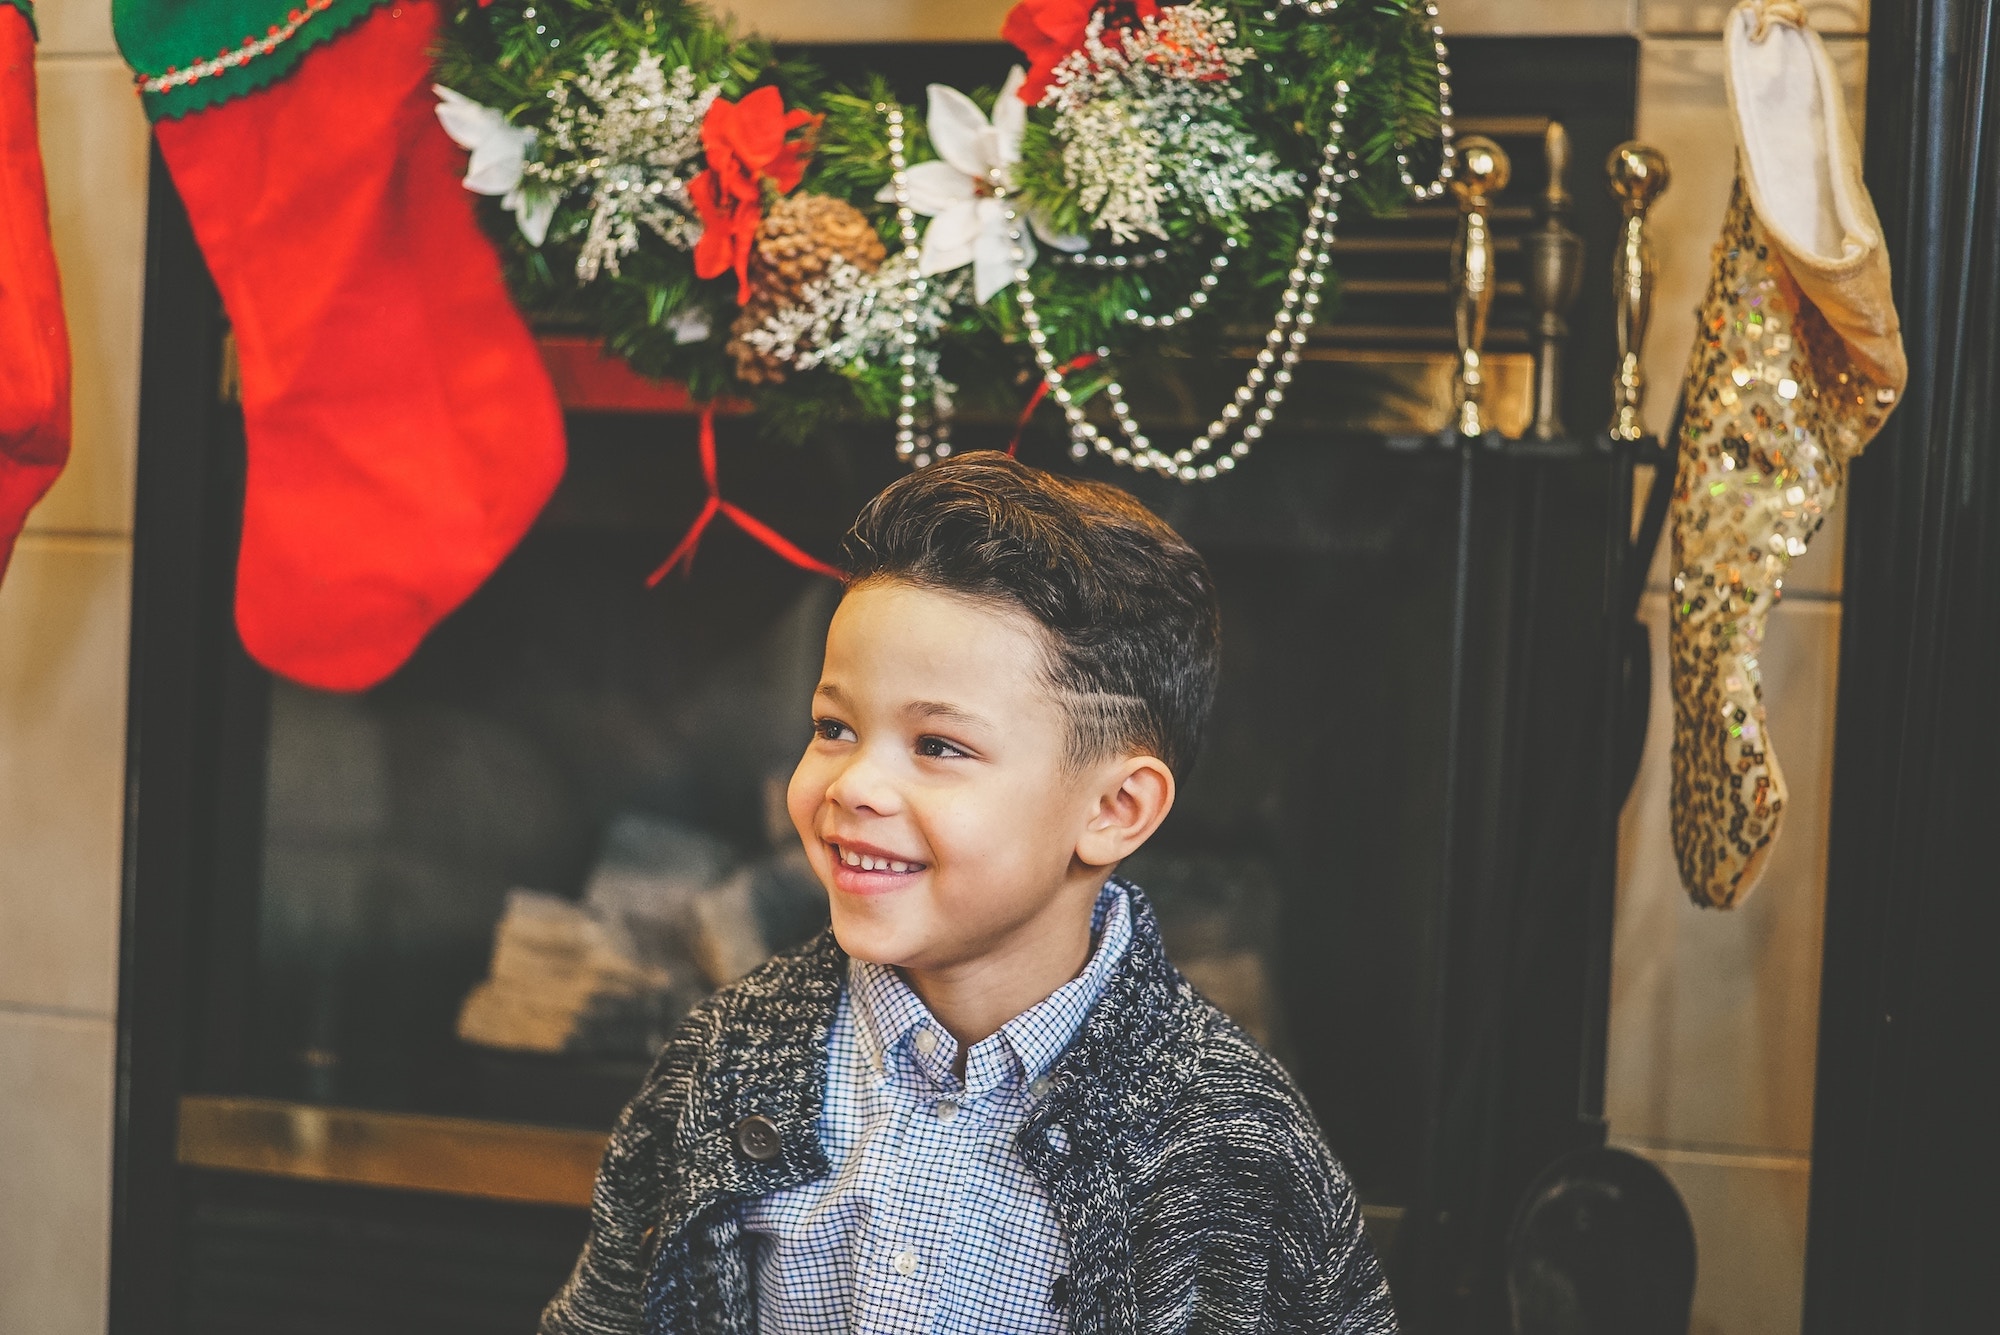 Mixed race child wearing a light blue button down shirt and dark gray cardigan sits in front of a fireplace with garland and Christmas stockings hung on it